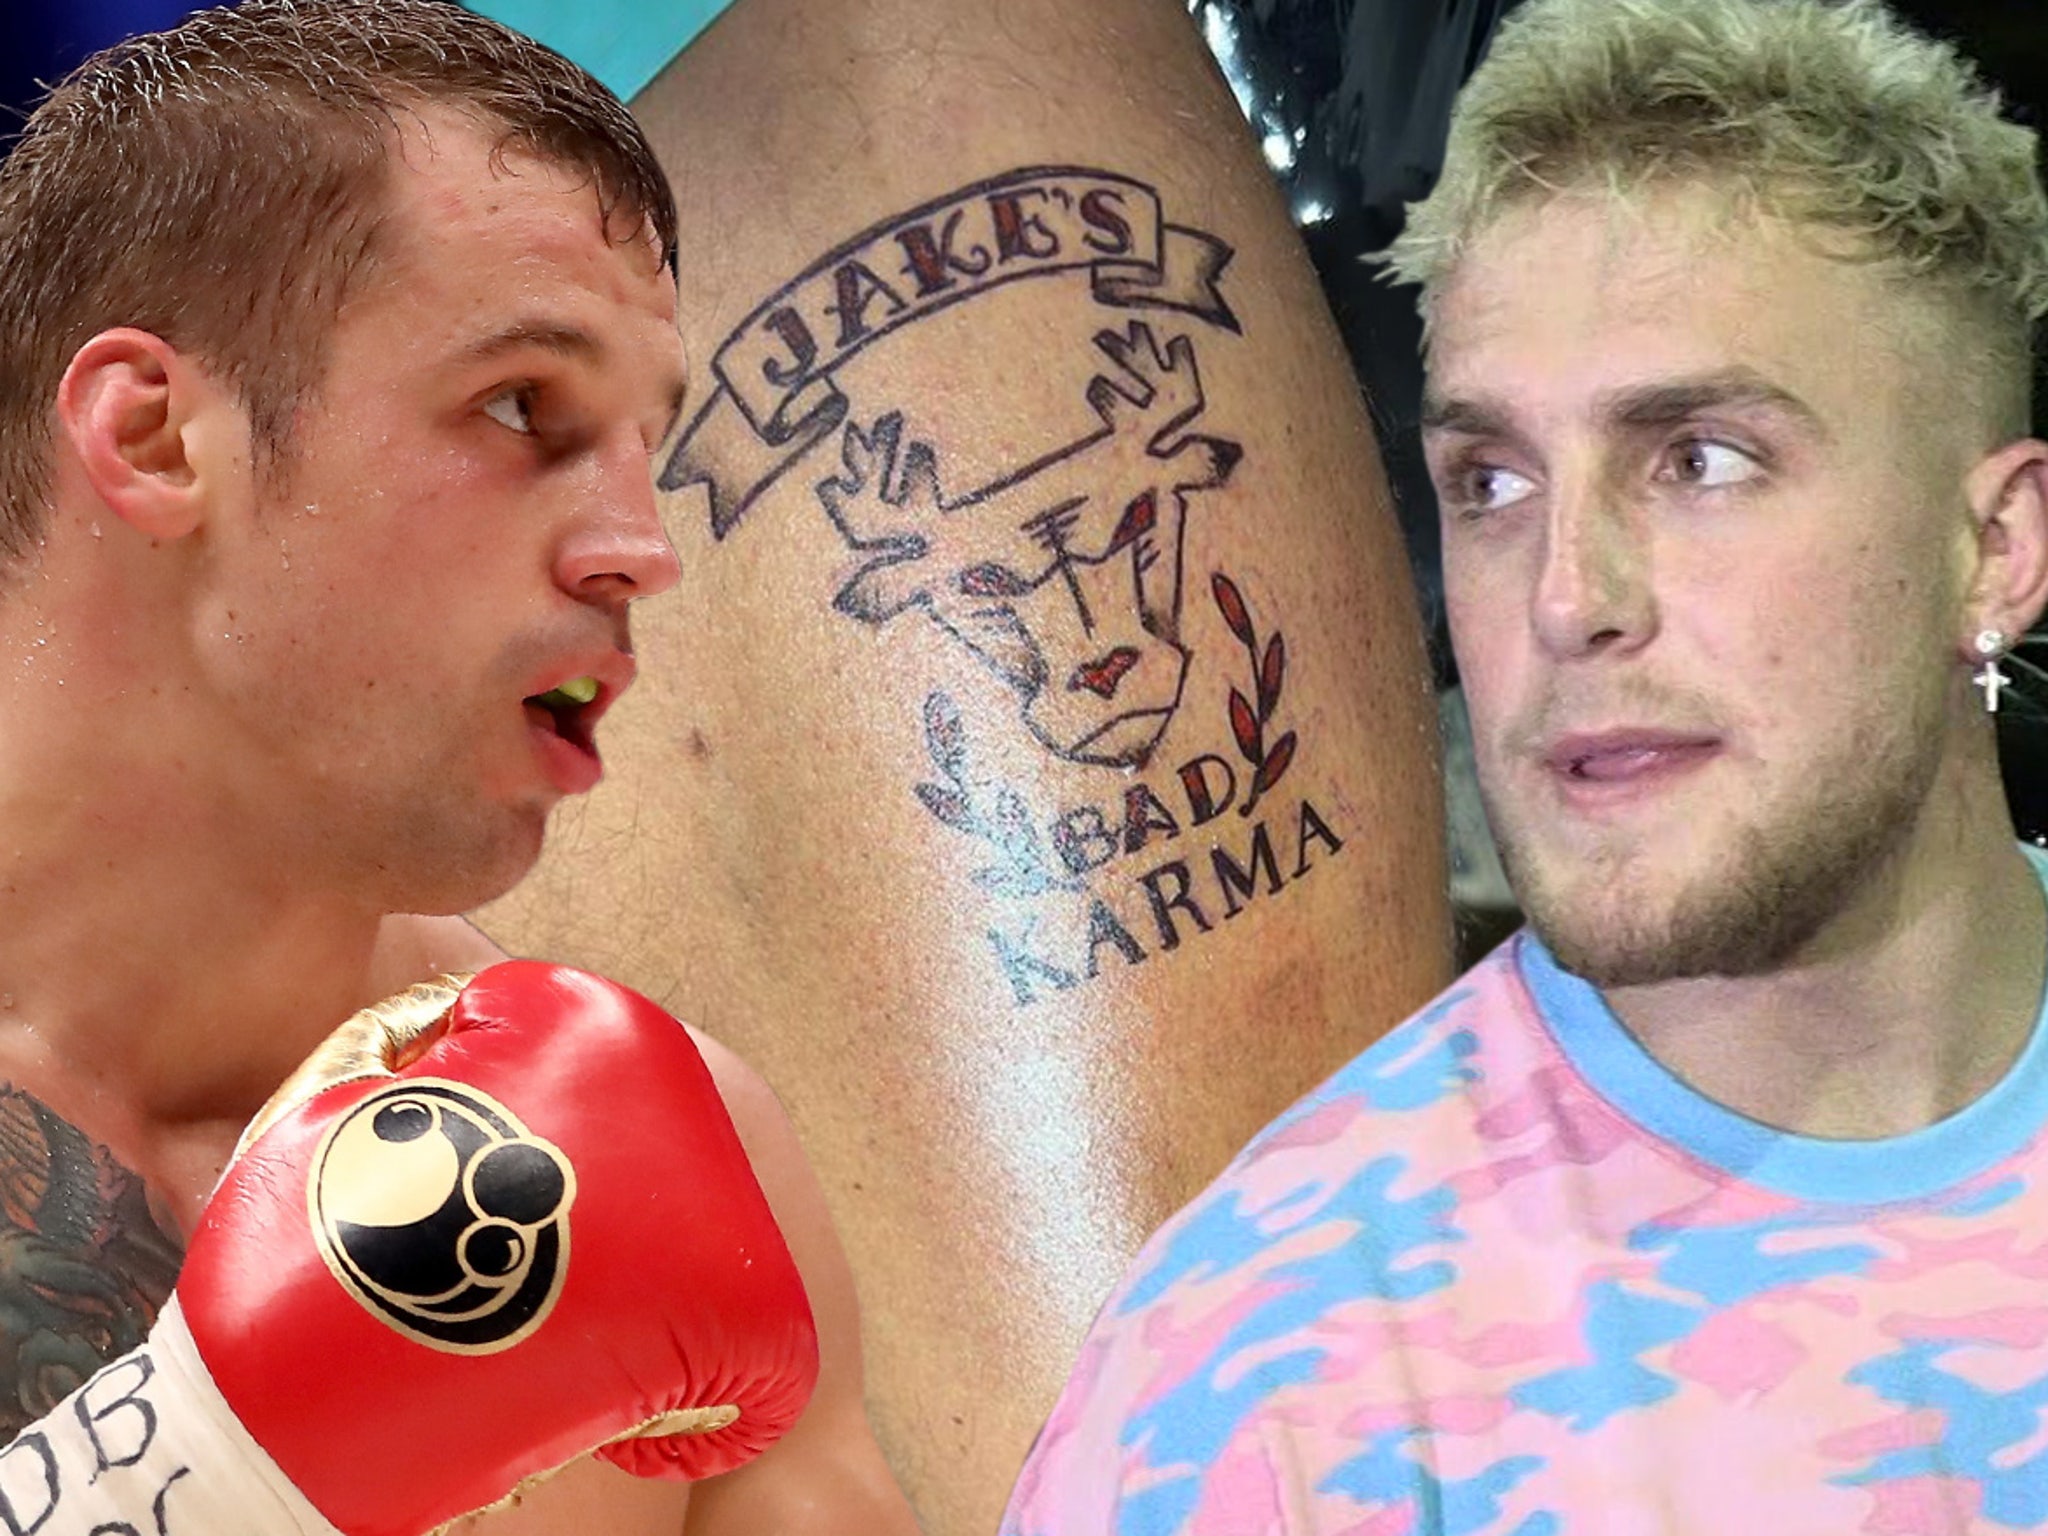 World Champion Boxer Gets Jake Paul Tattoo, Paul's Team Responds To Fight Offer